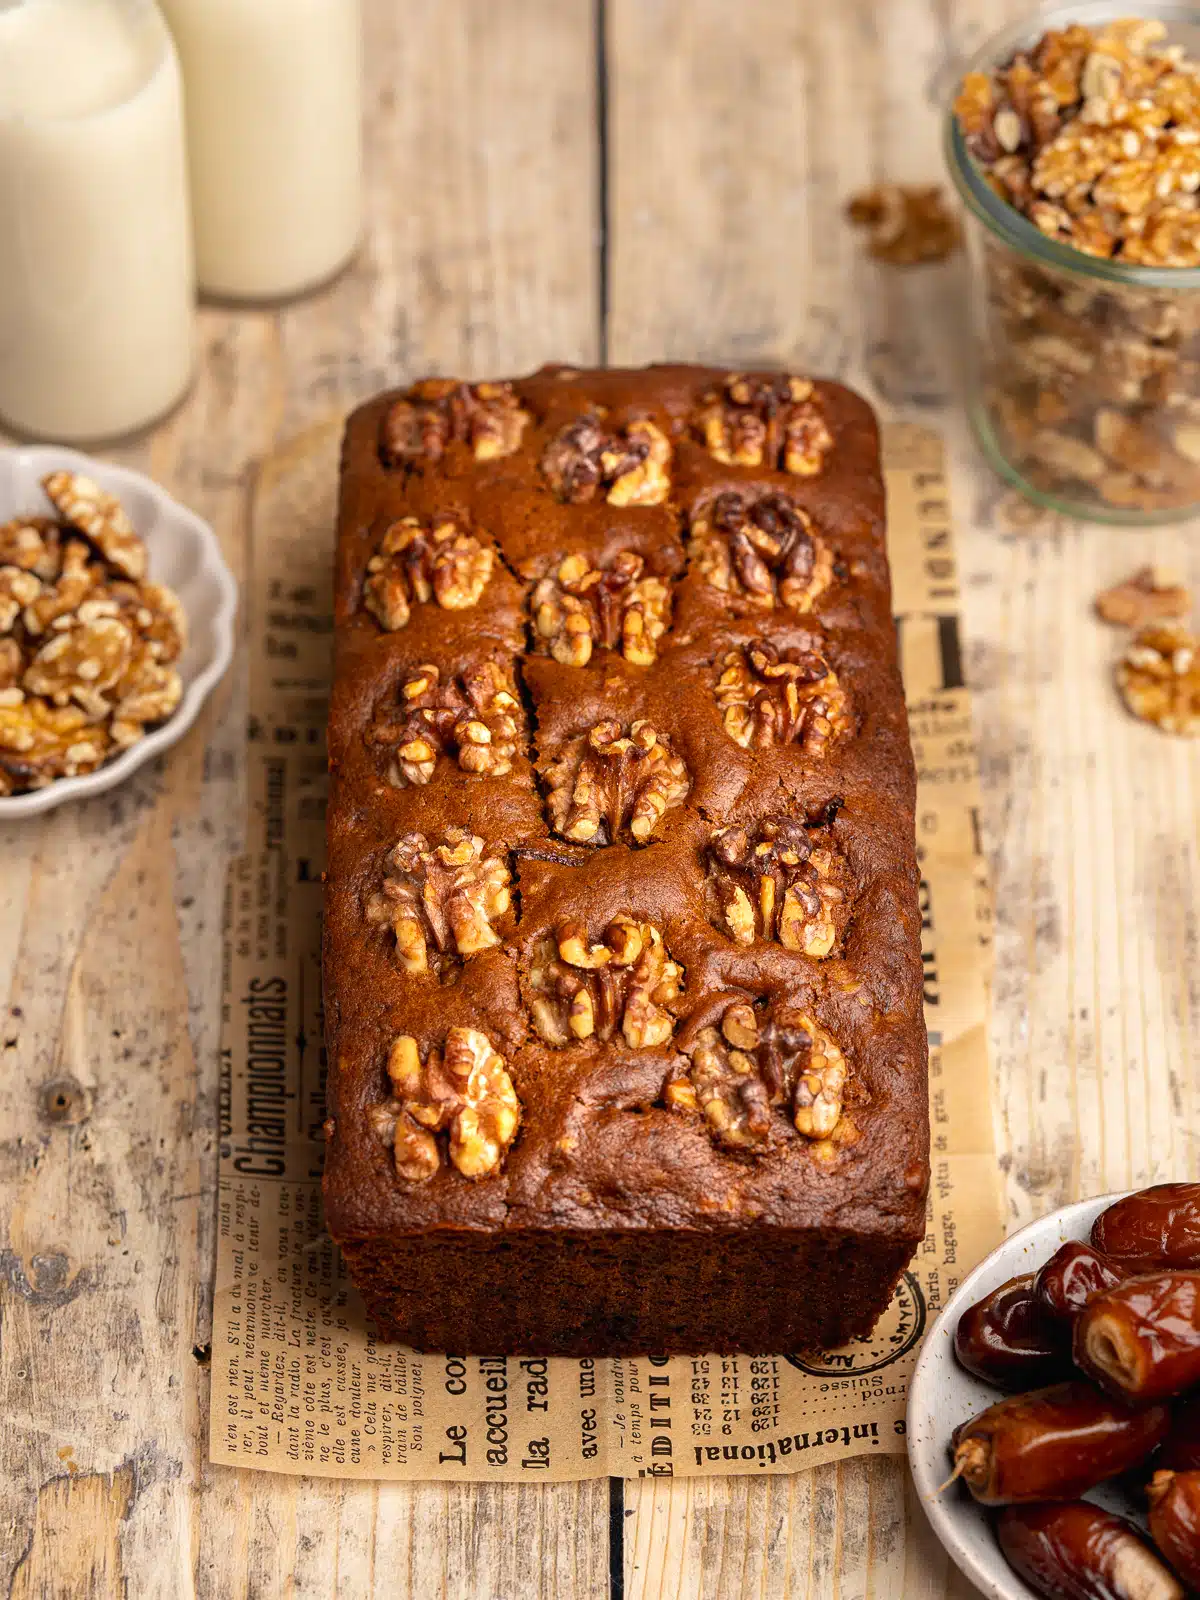 a loaf of freshly baked date cake with walnuts on top on a wooden surface with whole dates and walnuts scattered around.